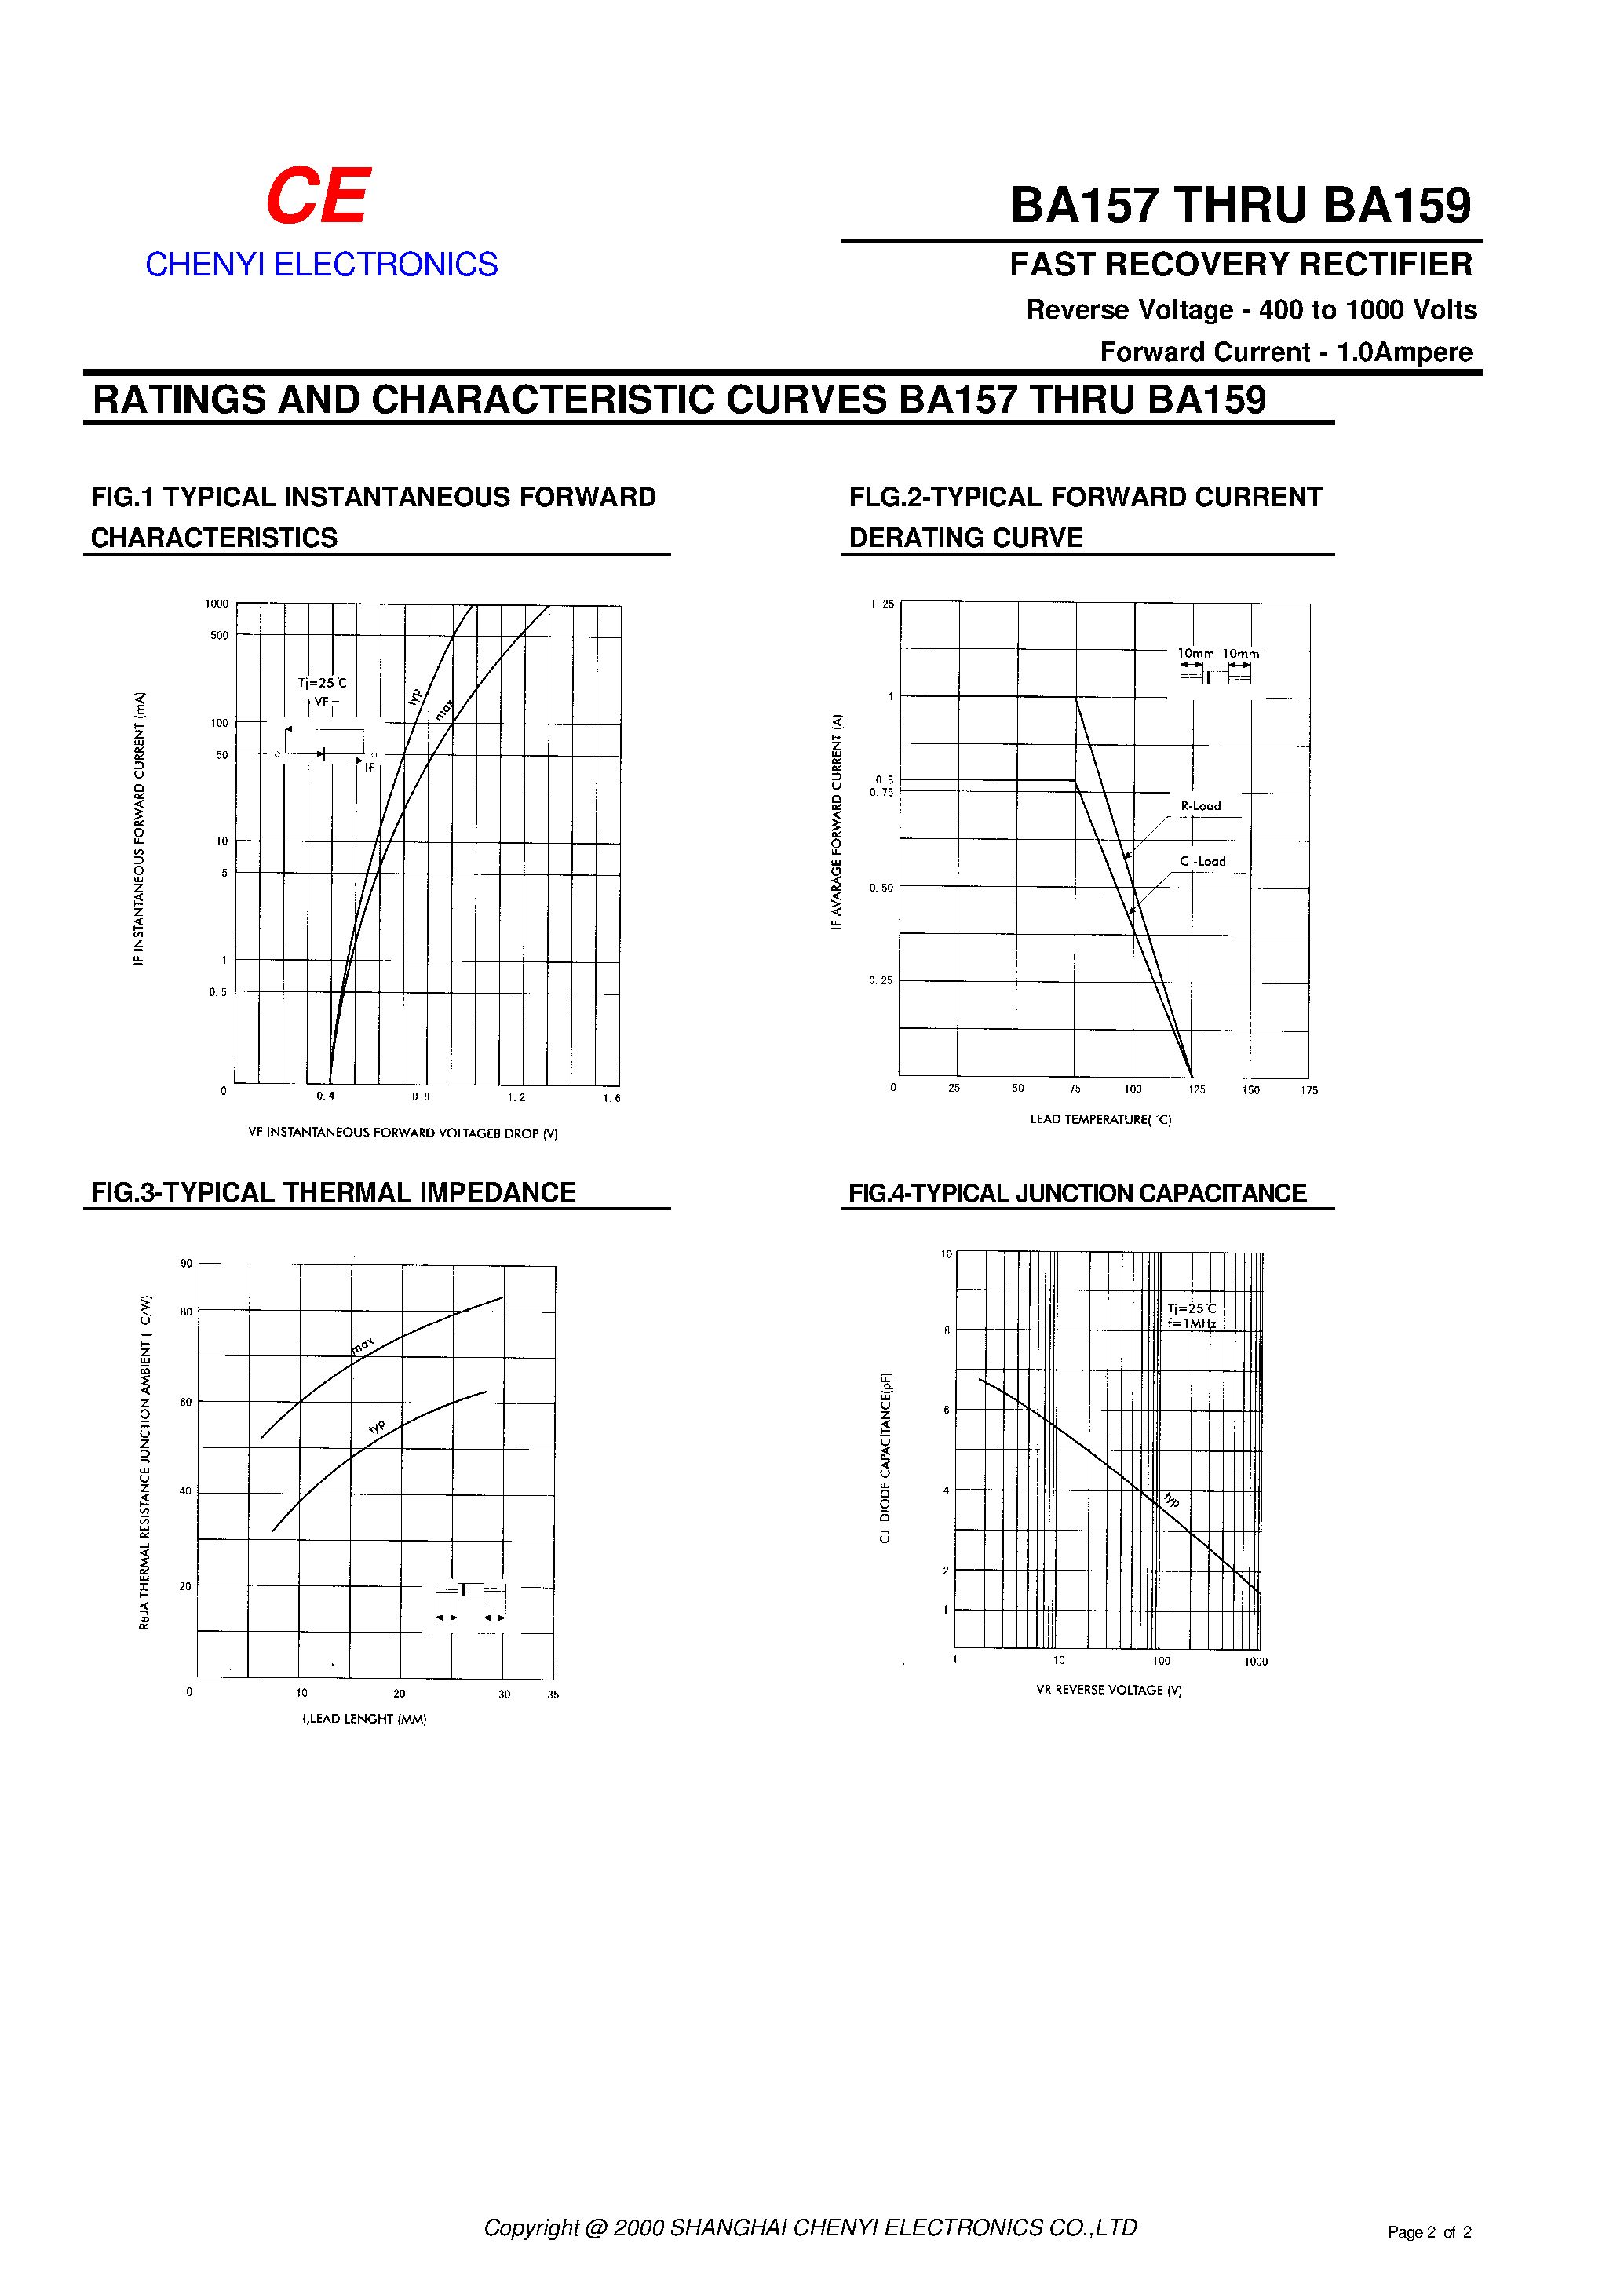 Datasheet BY158 - FAST RECOVERY RECTIFIER page 2